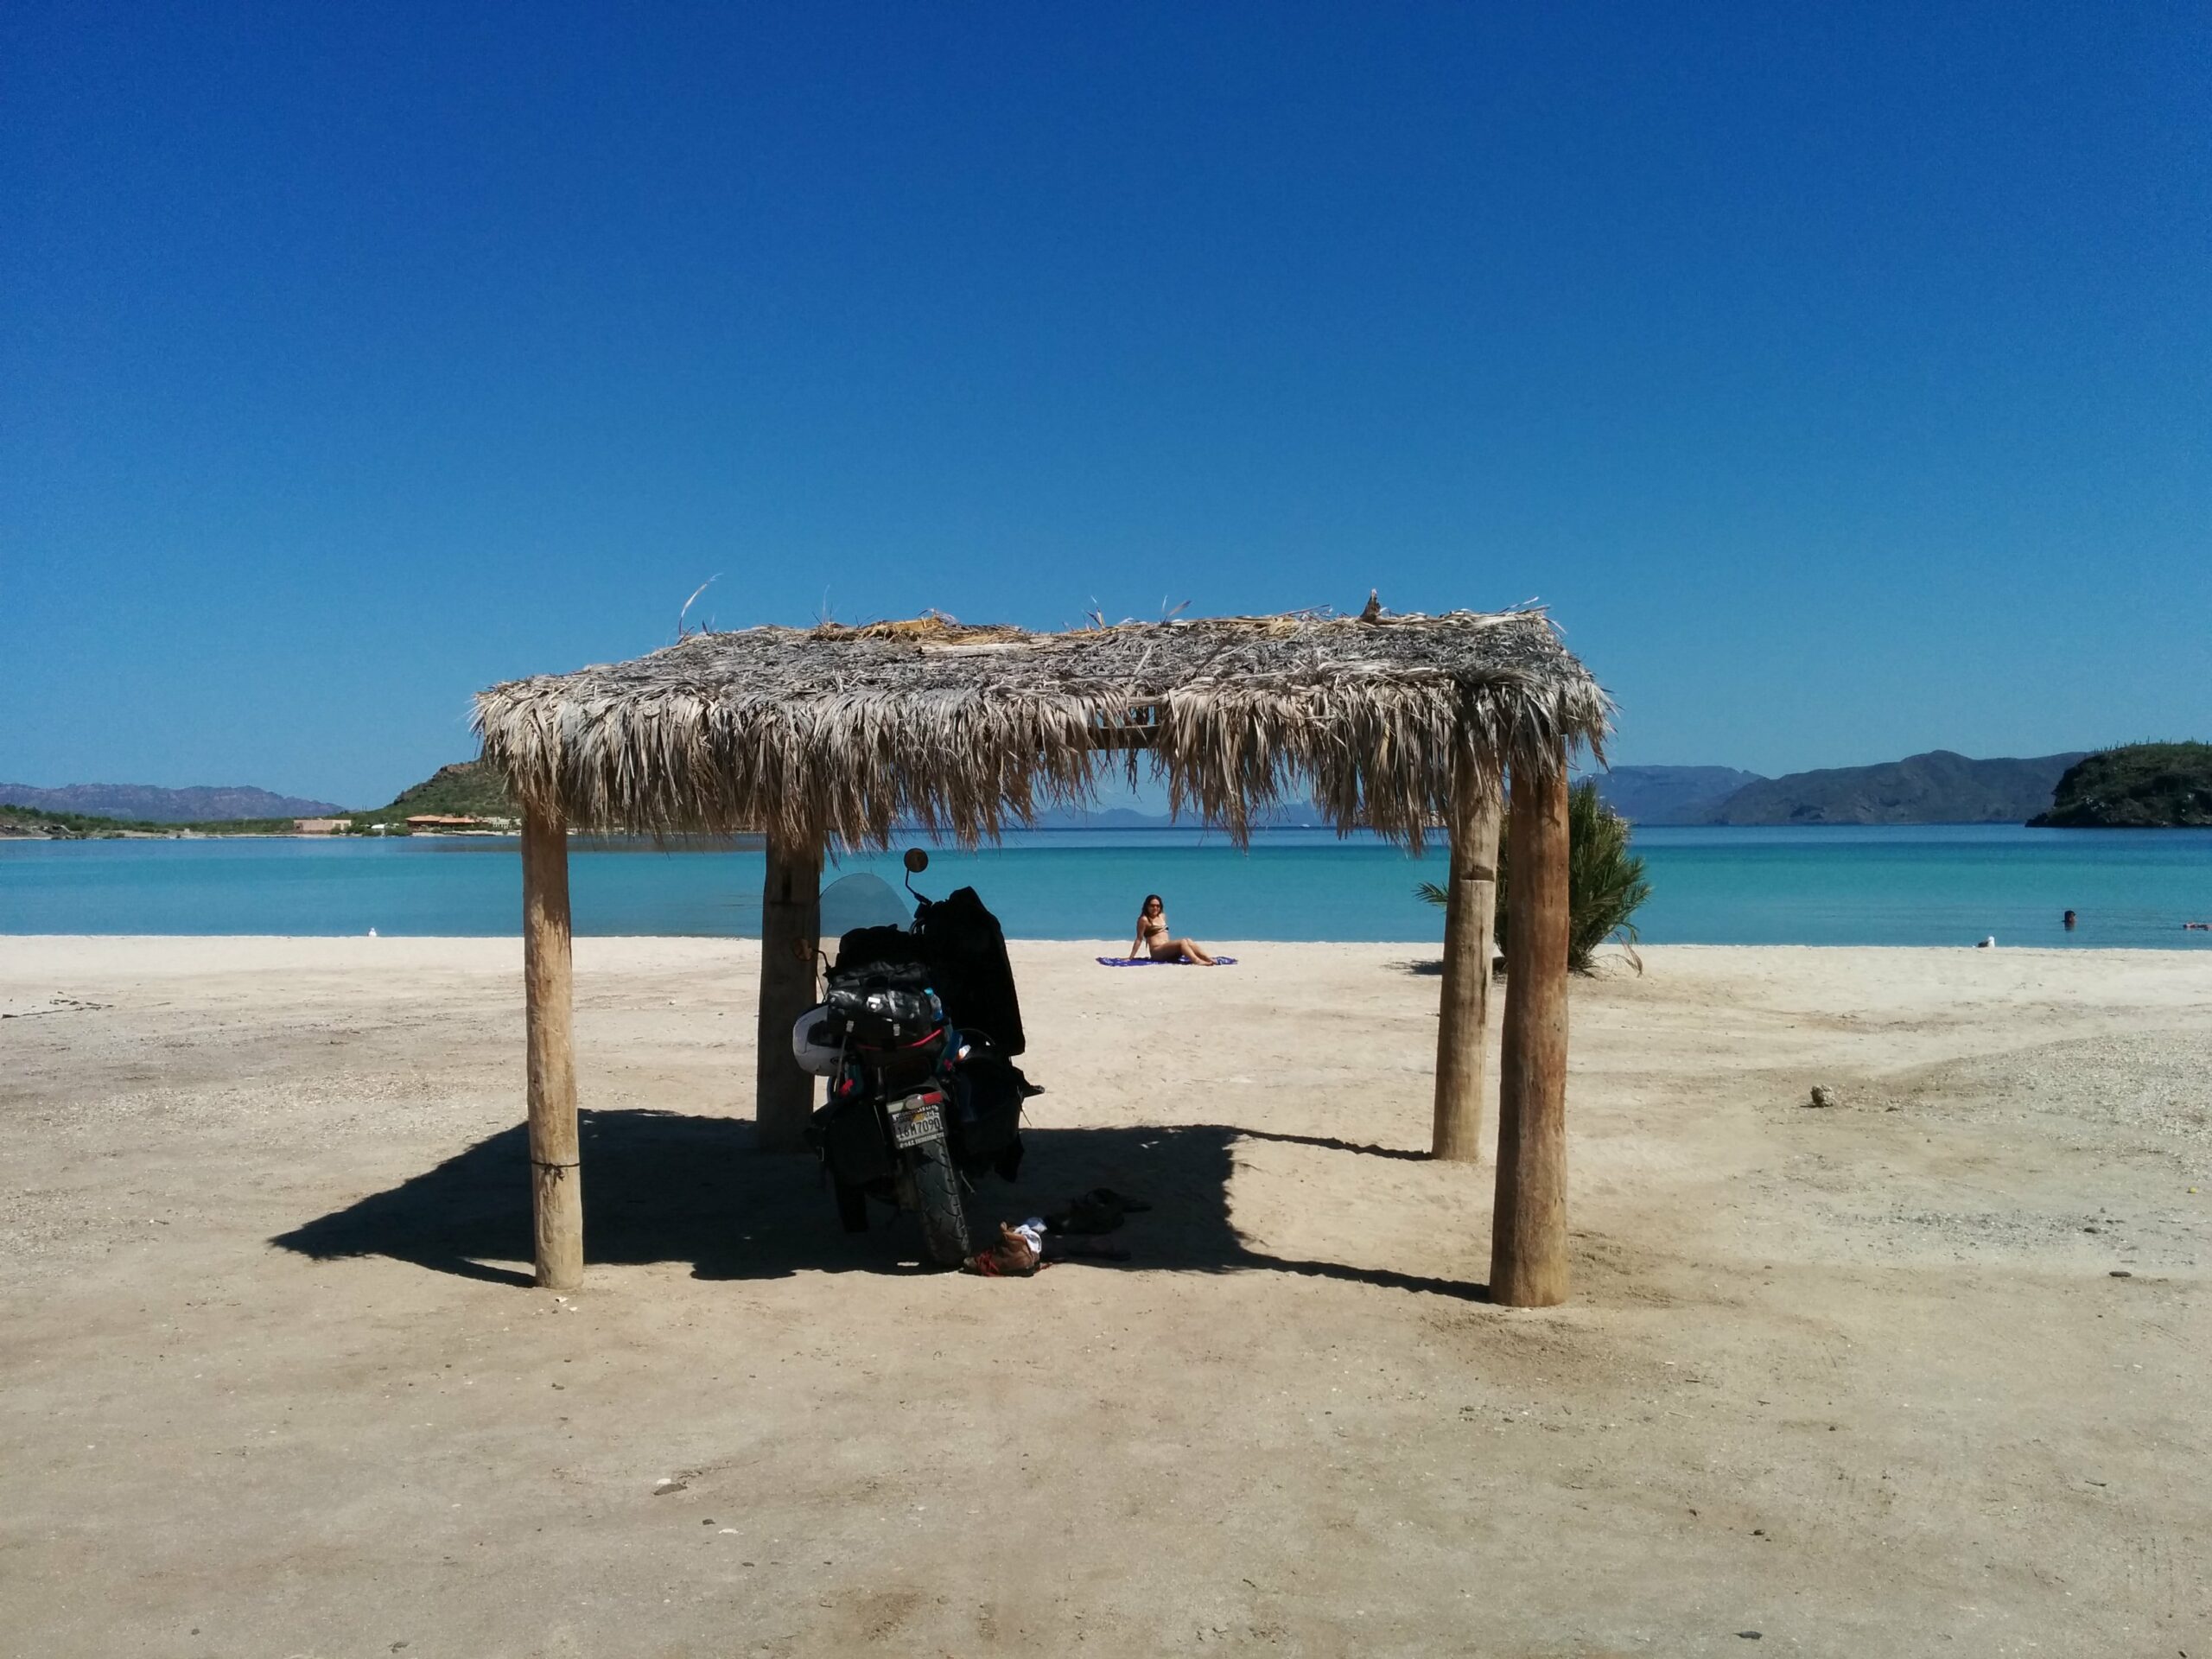 A view of Skyler's motorcycle parked beneath a cabana on a beach in Baja